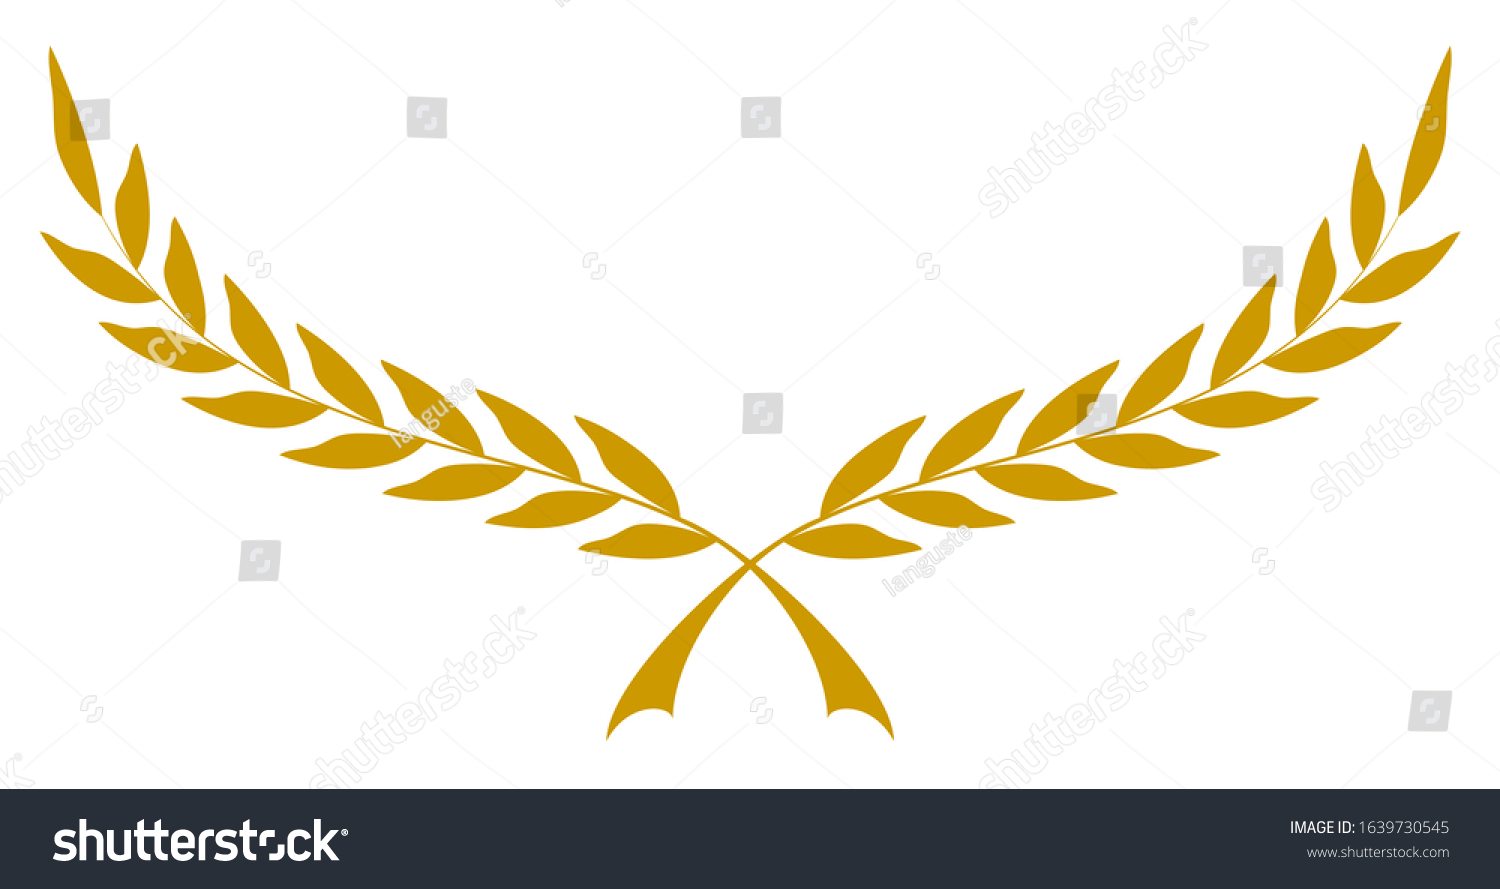 SVG of Laurel honor wreath vector in gold on white isolated background. svg